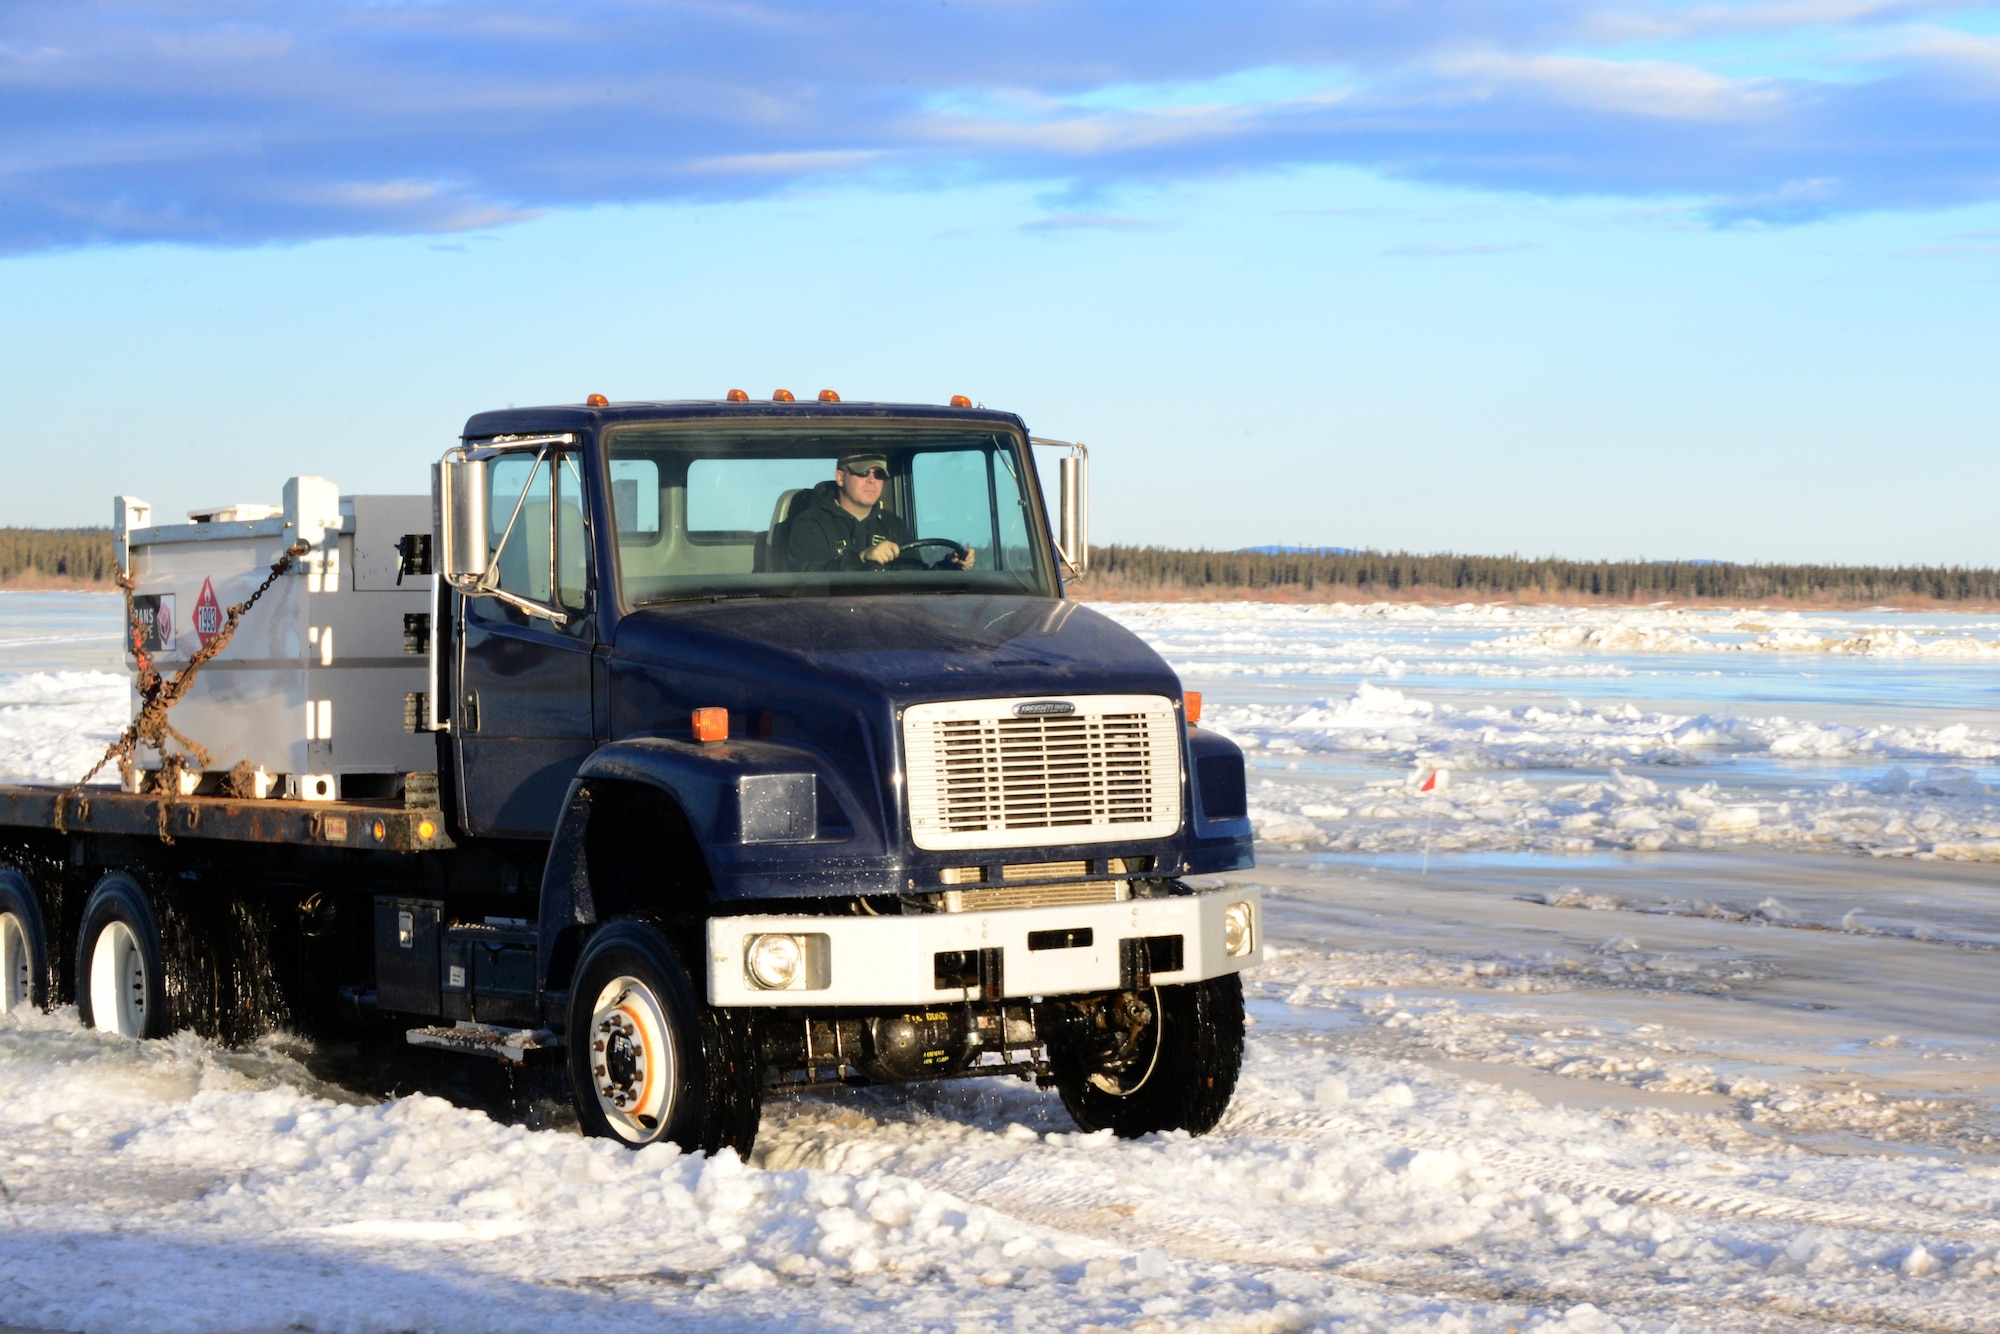 Tech. Sgt. John Jockusch, the 354th Civil Engineer Squadron noncommissioned officer in charge of range structural maintenance, drives a truck over the ice bridge in Delta Junction, Alaska, March 2, 2016. The ice bridge is used to get to and from the Oklahoma Range, part of RED FLAG-Alaska’s strategic training area, and is built by Airmen, soldiers and DoD civilians. (U.S. Air Force photo by Airman 1st Class Cassandra Whitman/Released)